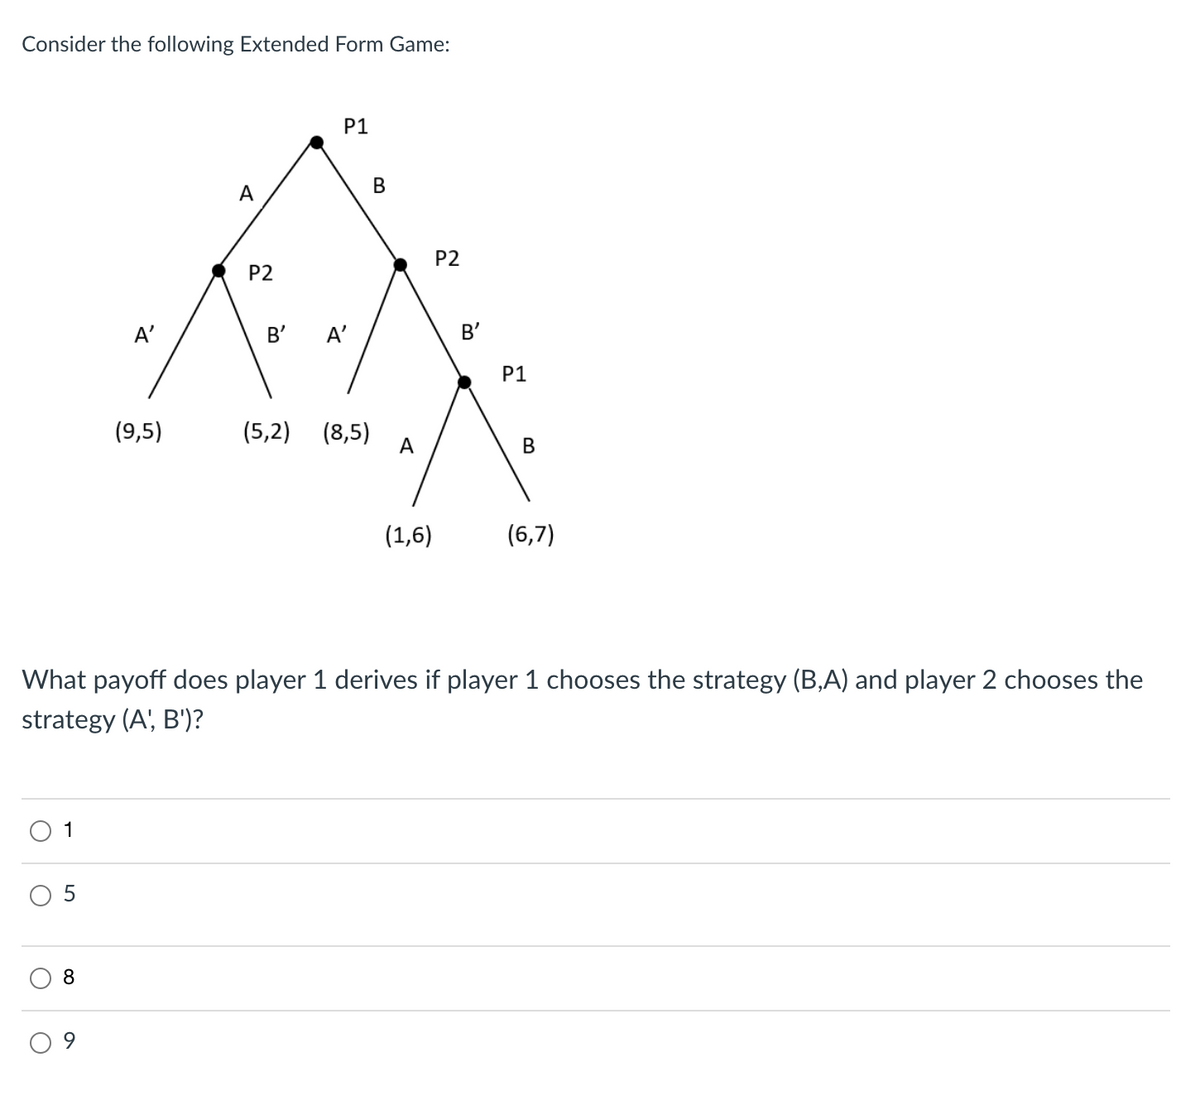 Consider the following Extended Form Game:
0 1
O
O
5
8
A'
a
(9,5)
A
P2
P1
B' A'
(5,2) (8,5)
B
A
(1,6)
What payoff does player 1 derives if player 1 chooses the strategy (B,A) and player 2 chooses the
strategy (A, B')?
P2
B'
P1
B
(6,7)